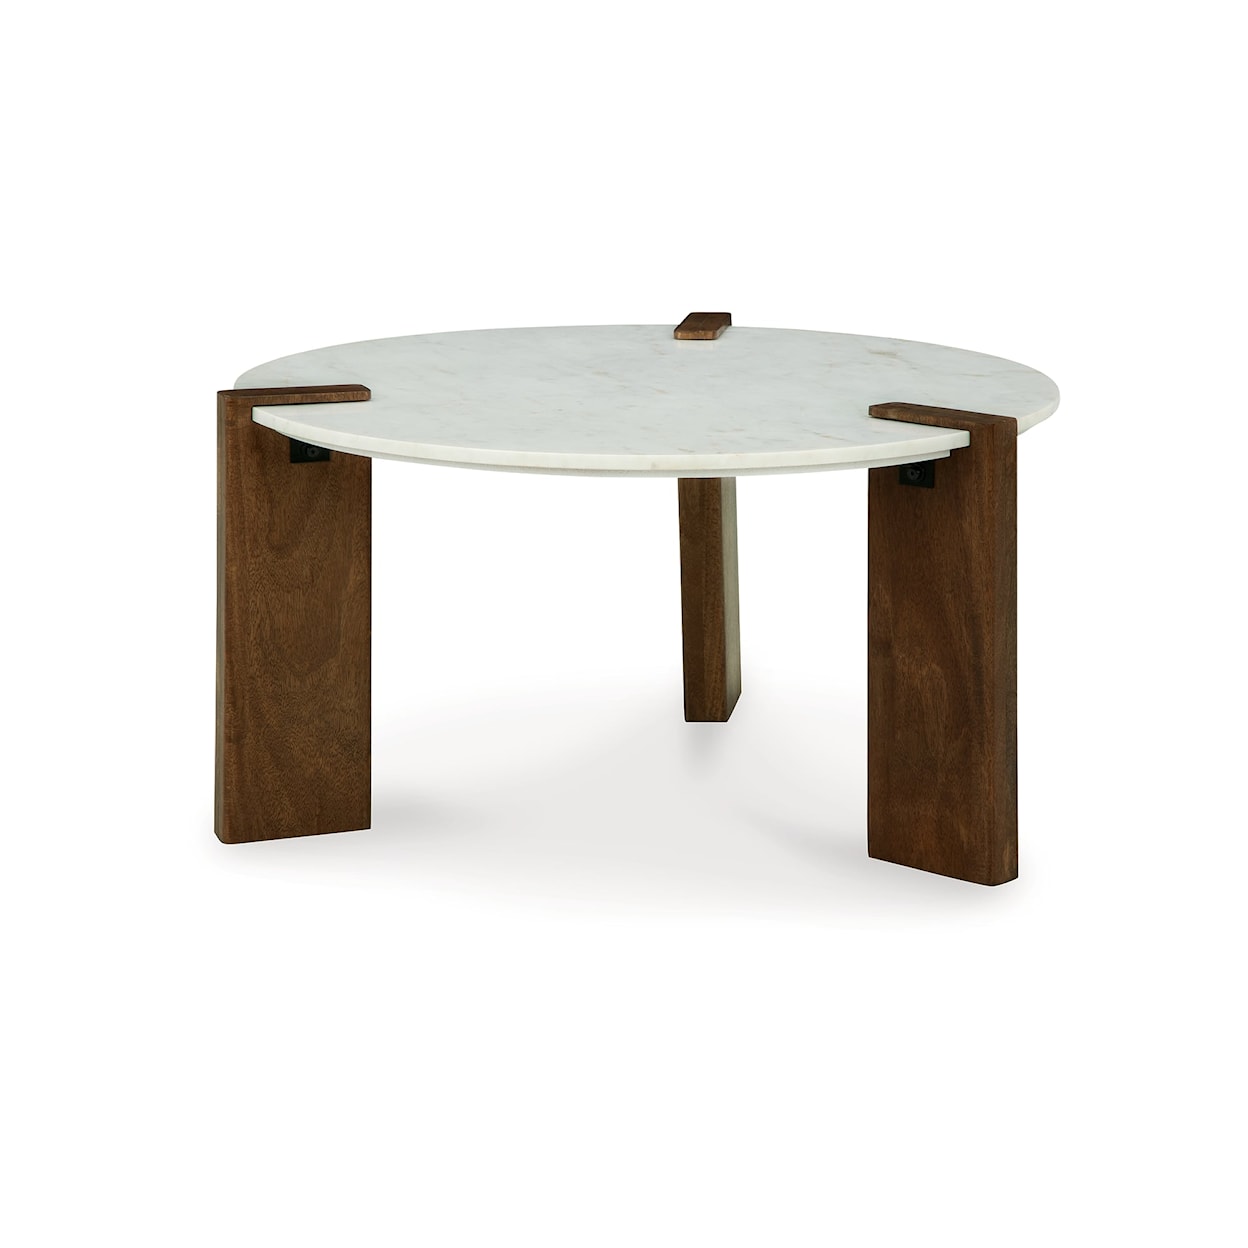 Signature Design by Ashley Furniture Isanti Round Coffee Table